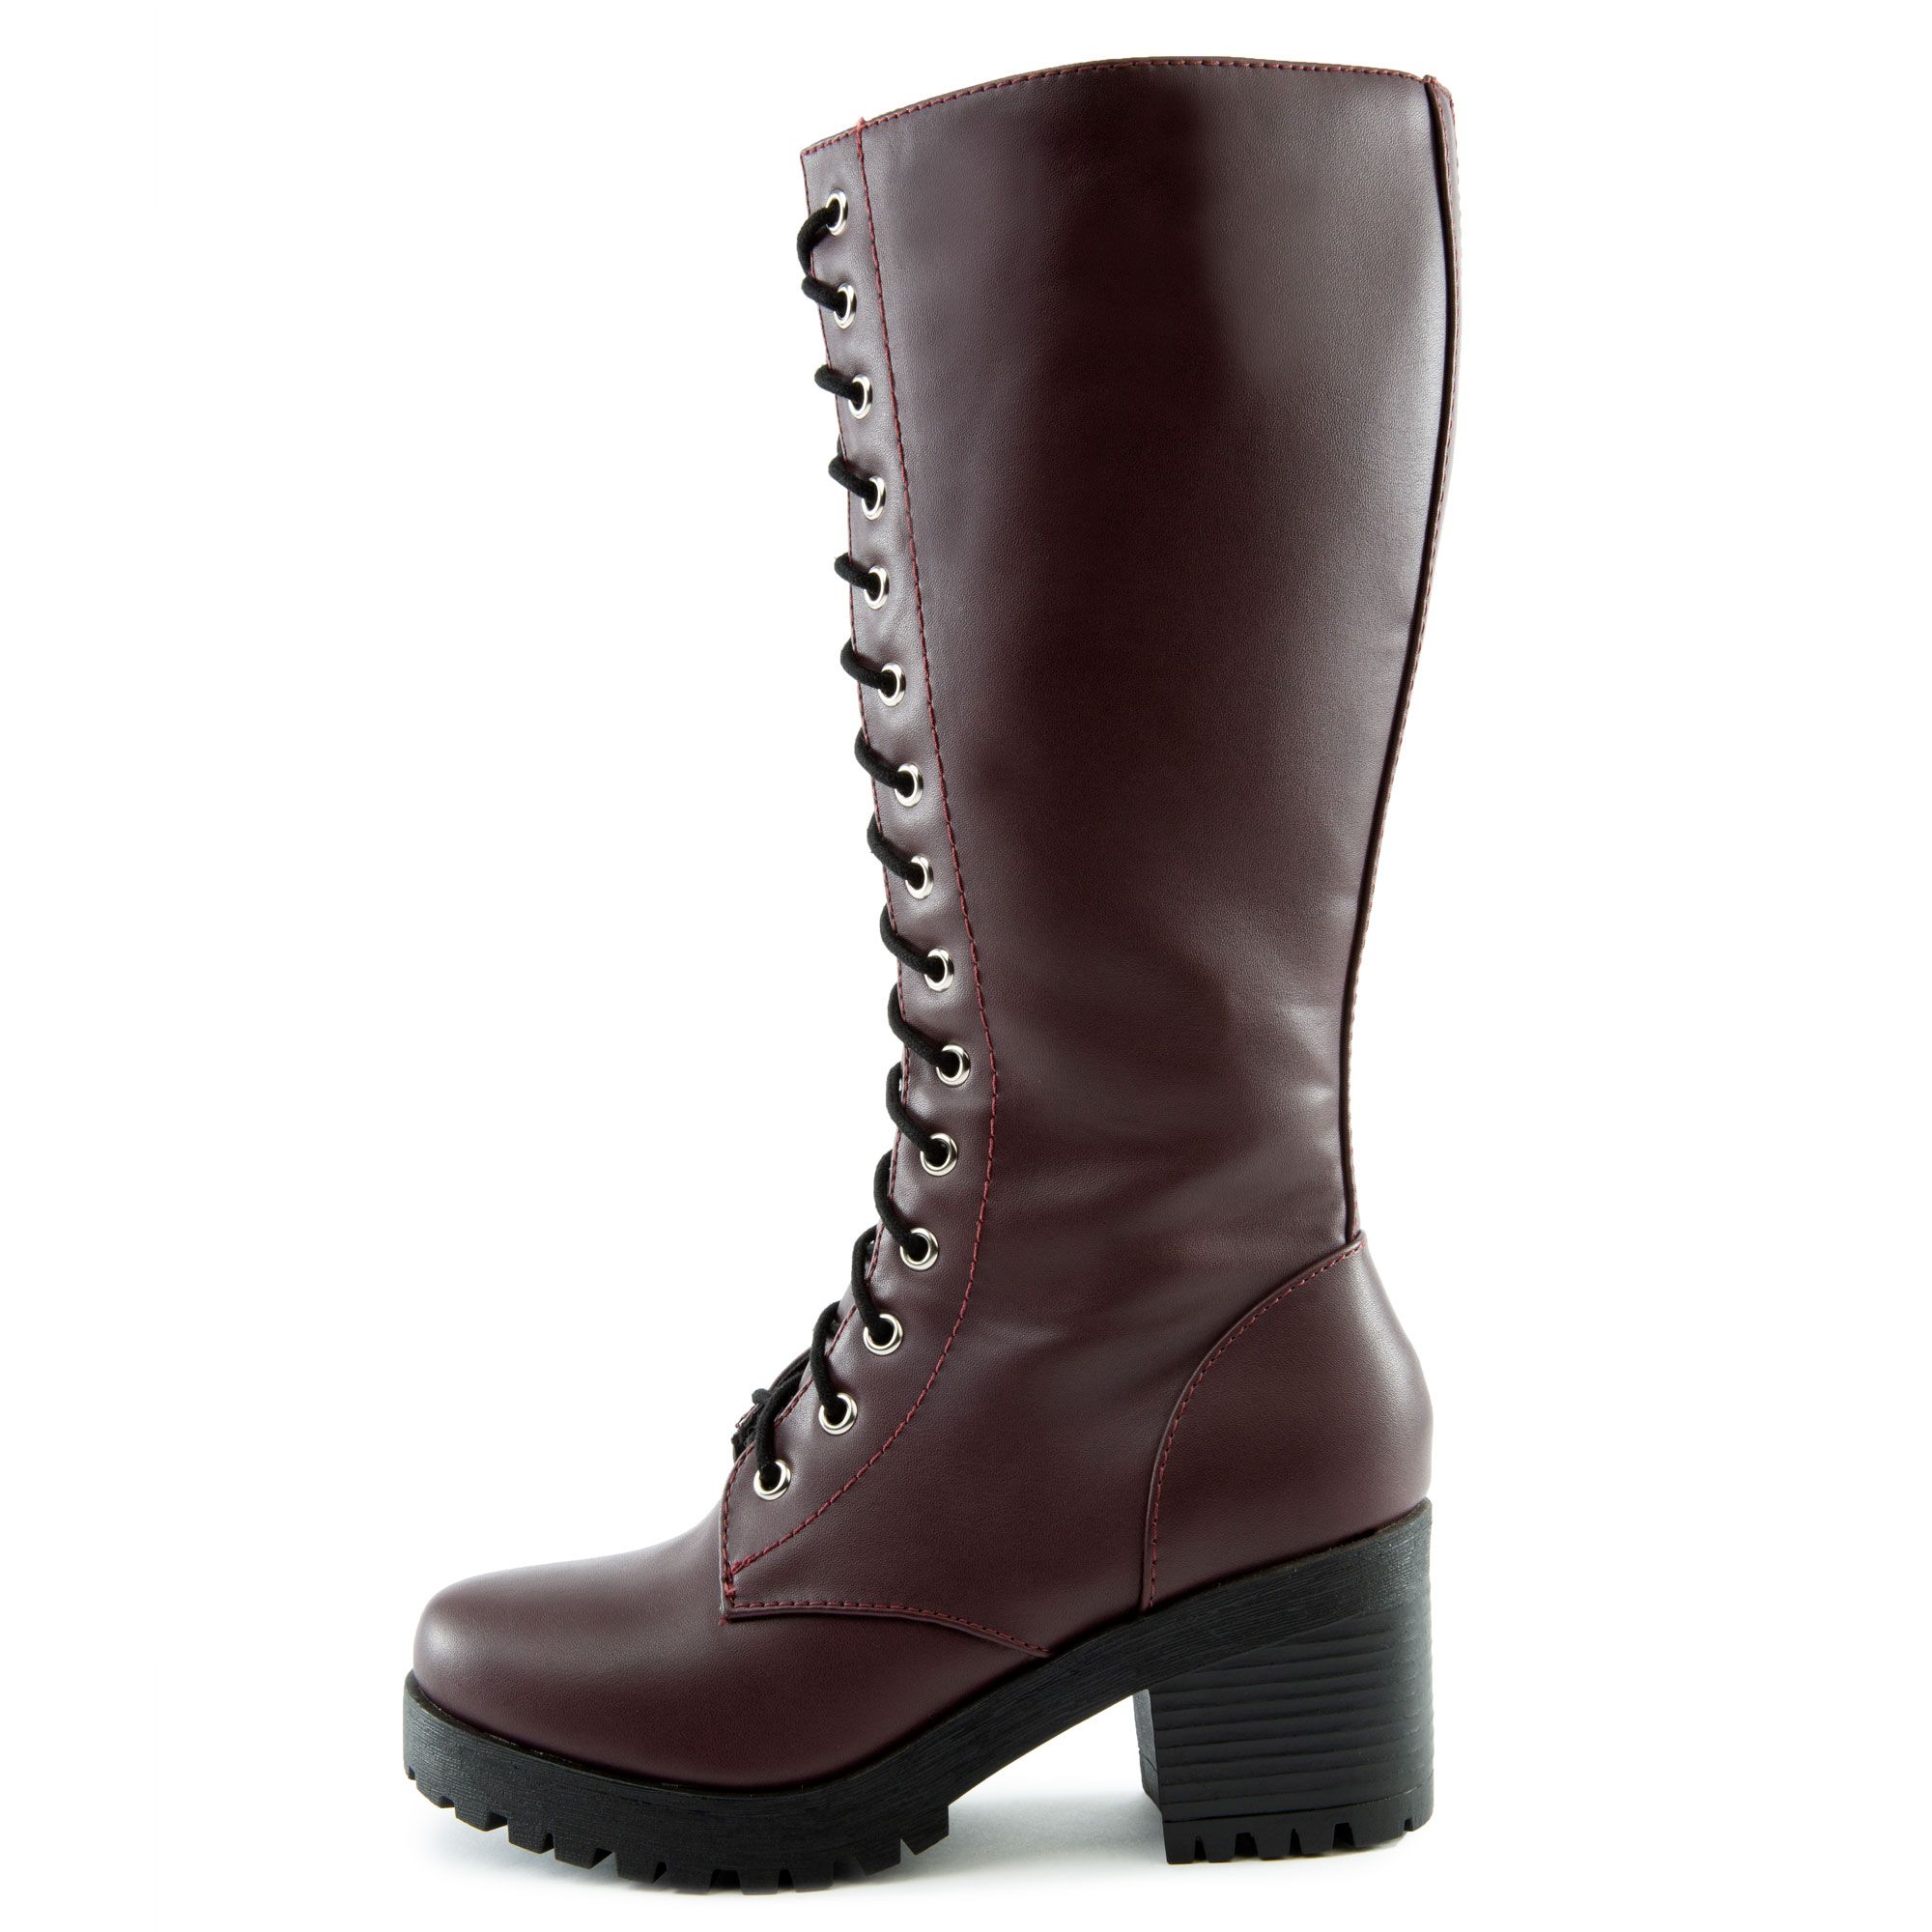 FORTUNE DYNAMICS Canopy-S Lace-Up Combat Boots FD CANOPY-S-WINE - Shiekh